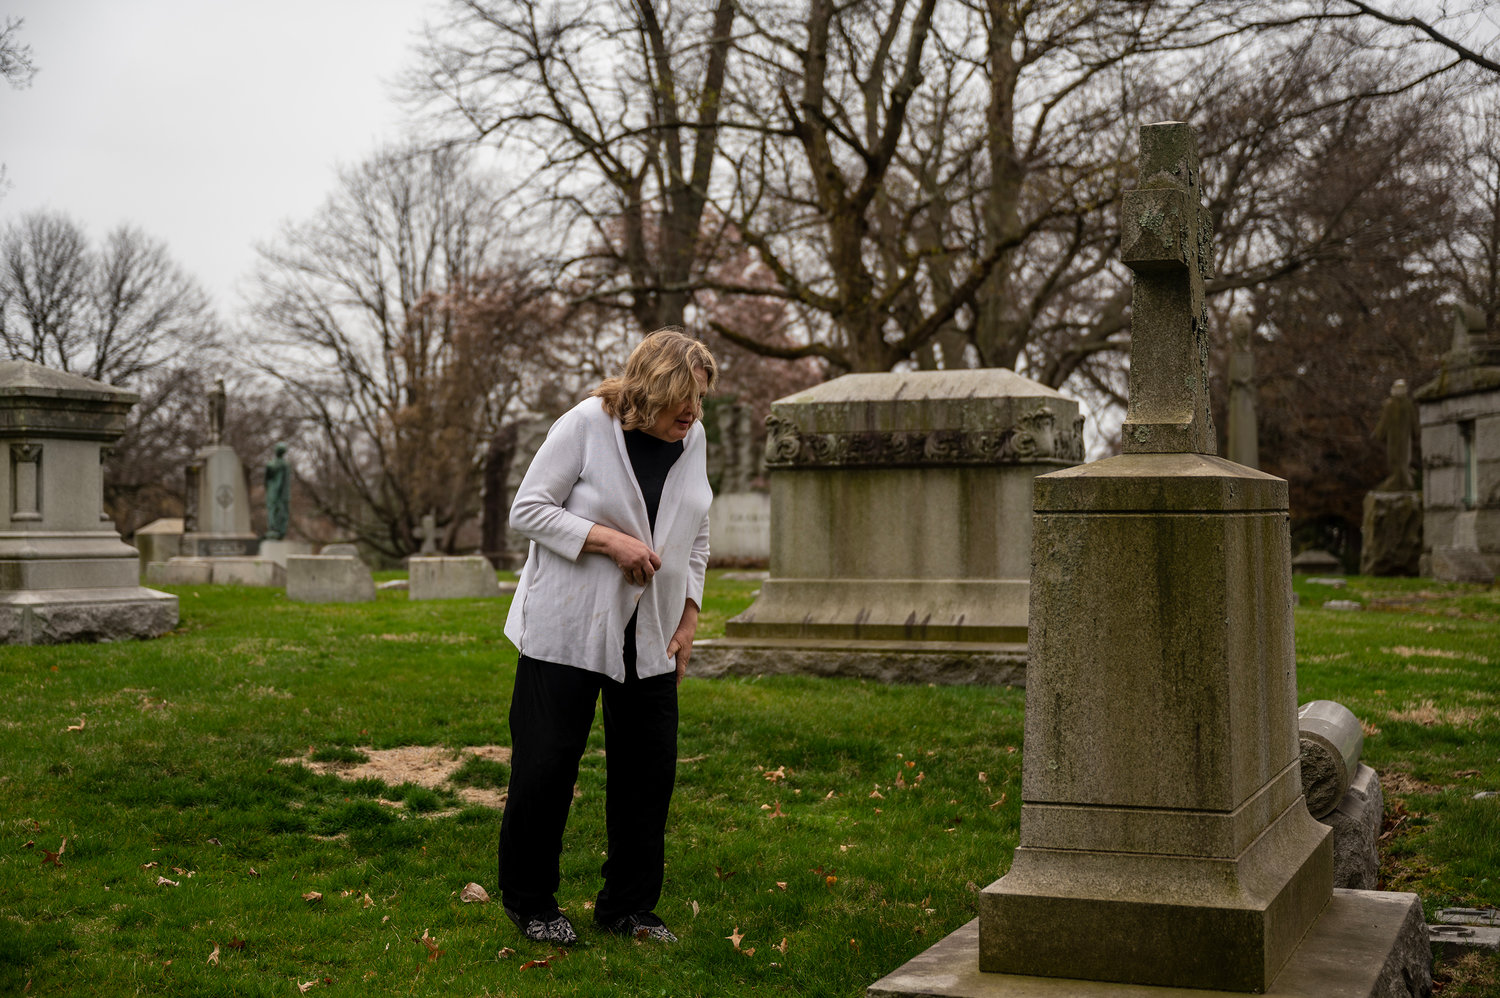 Susan Olsen, the Woodlawn Cemetery historian who gave the Titanic tour, has worked at for more than 40 years. She attended college in Tennessee and received her graduate degree in history at Vanderbilt.